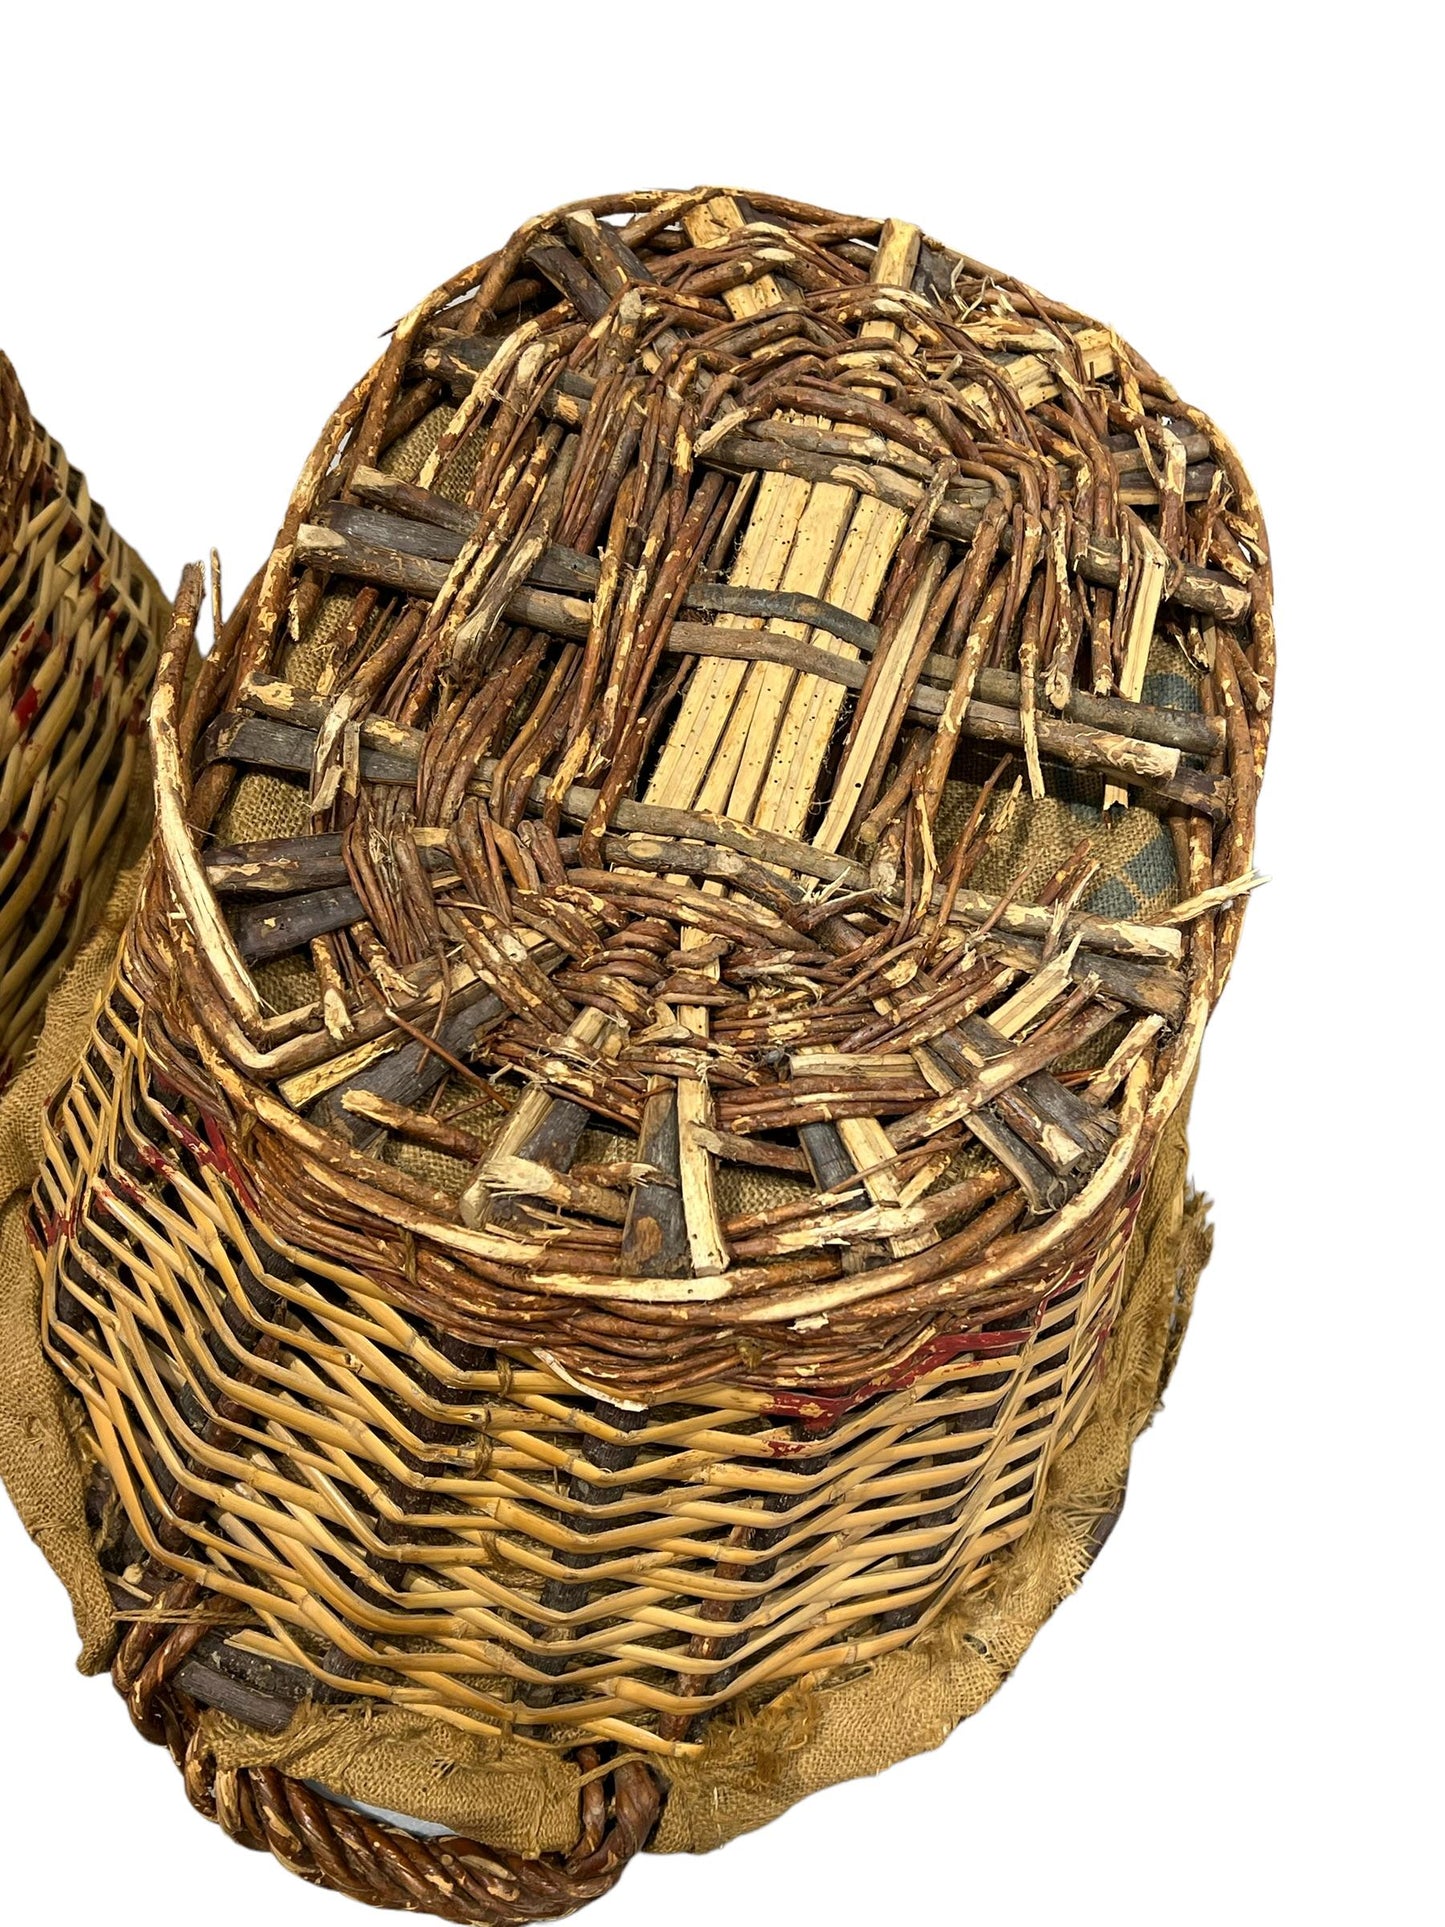 French Wicker Champagne Basket with Liner